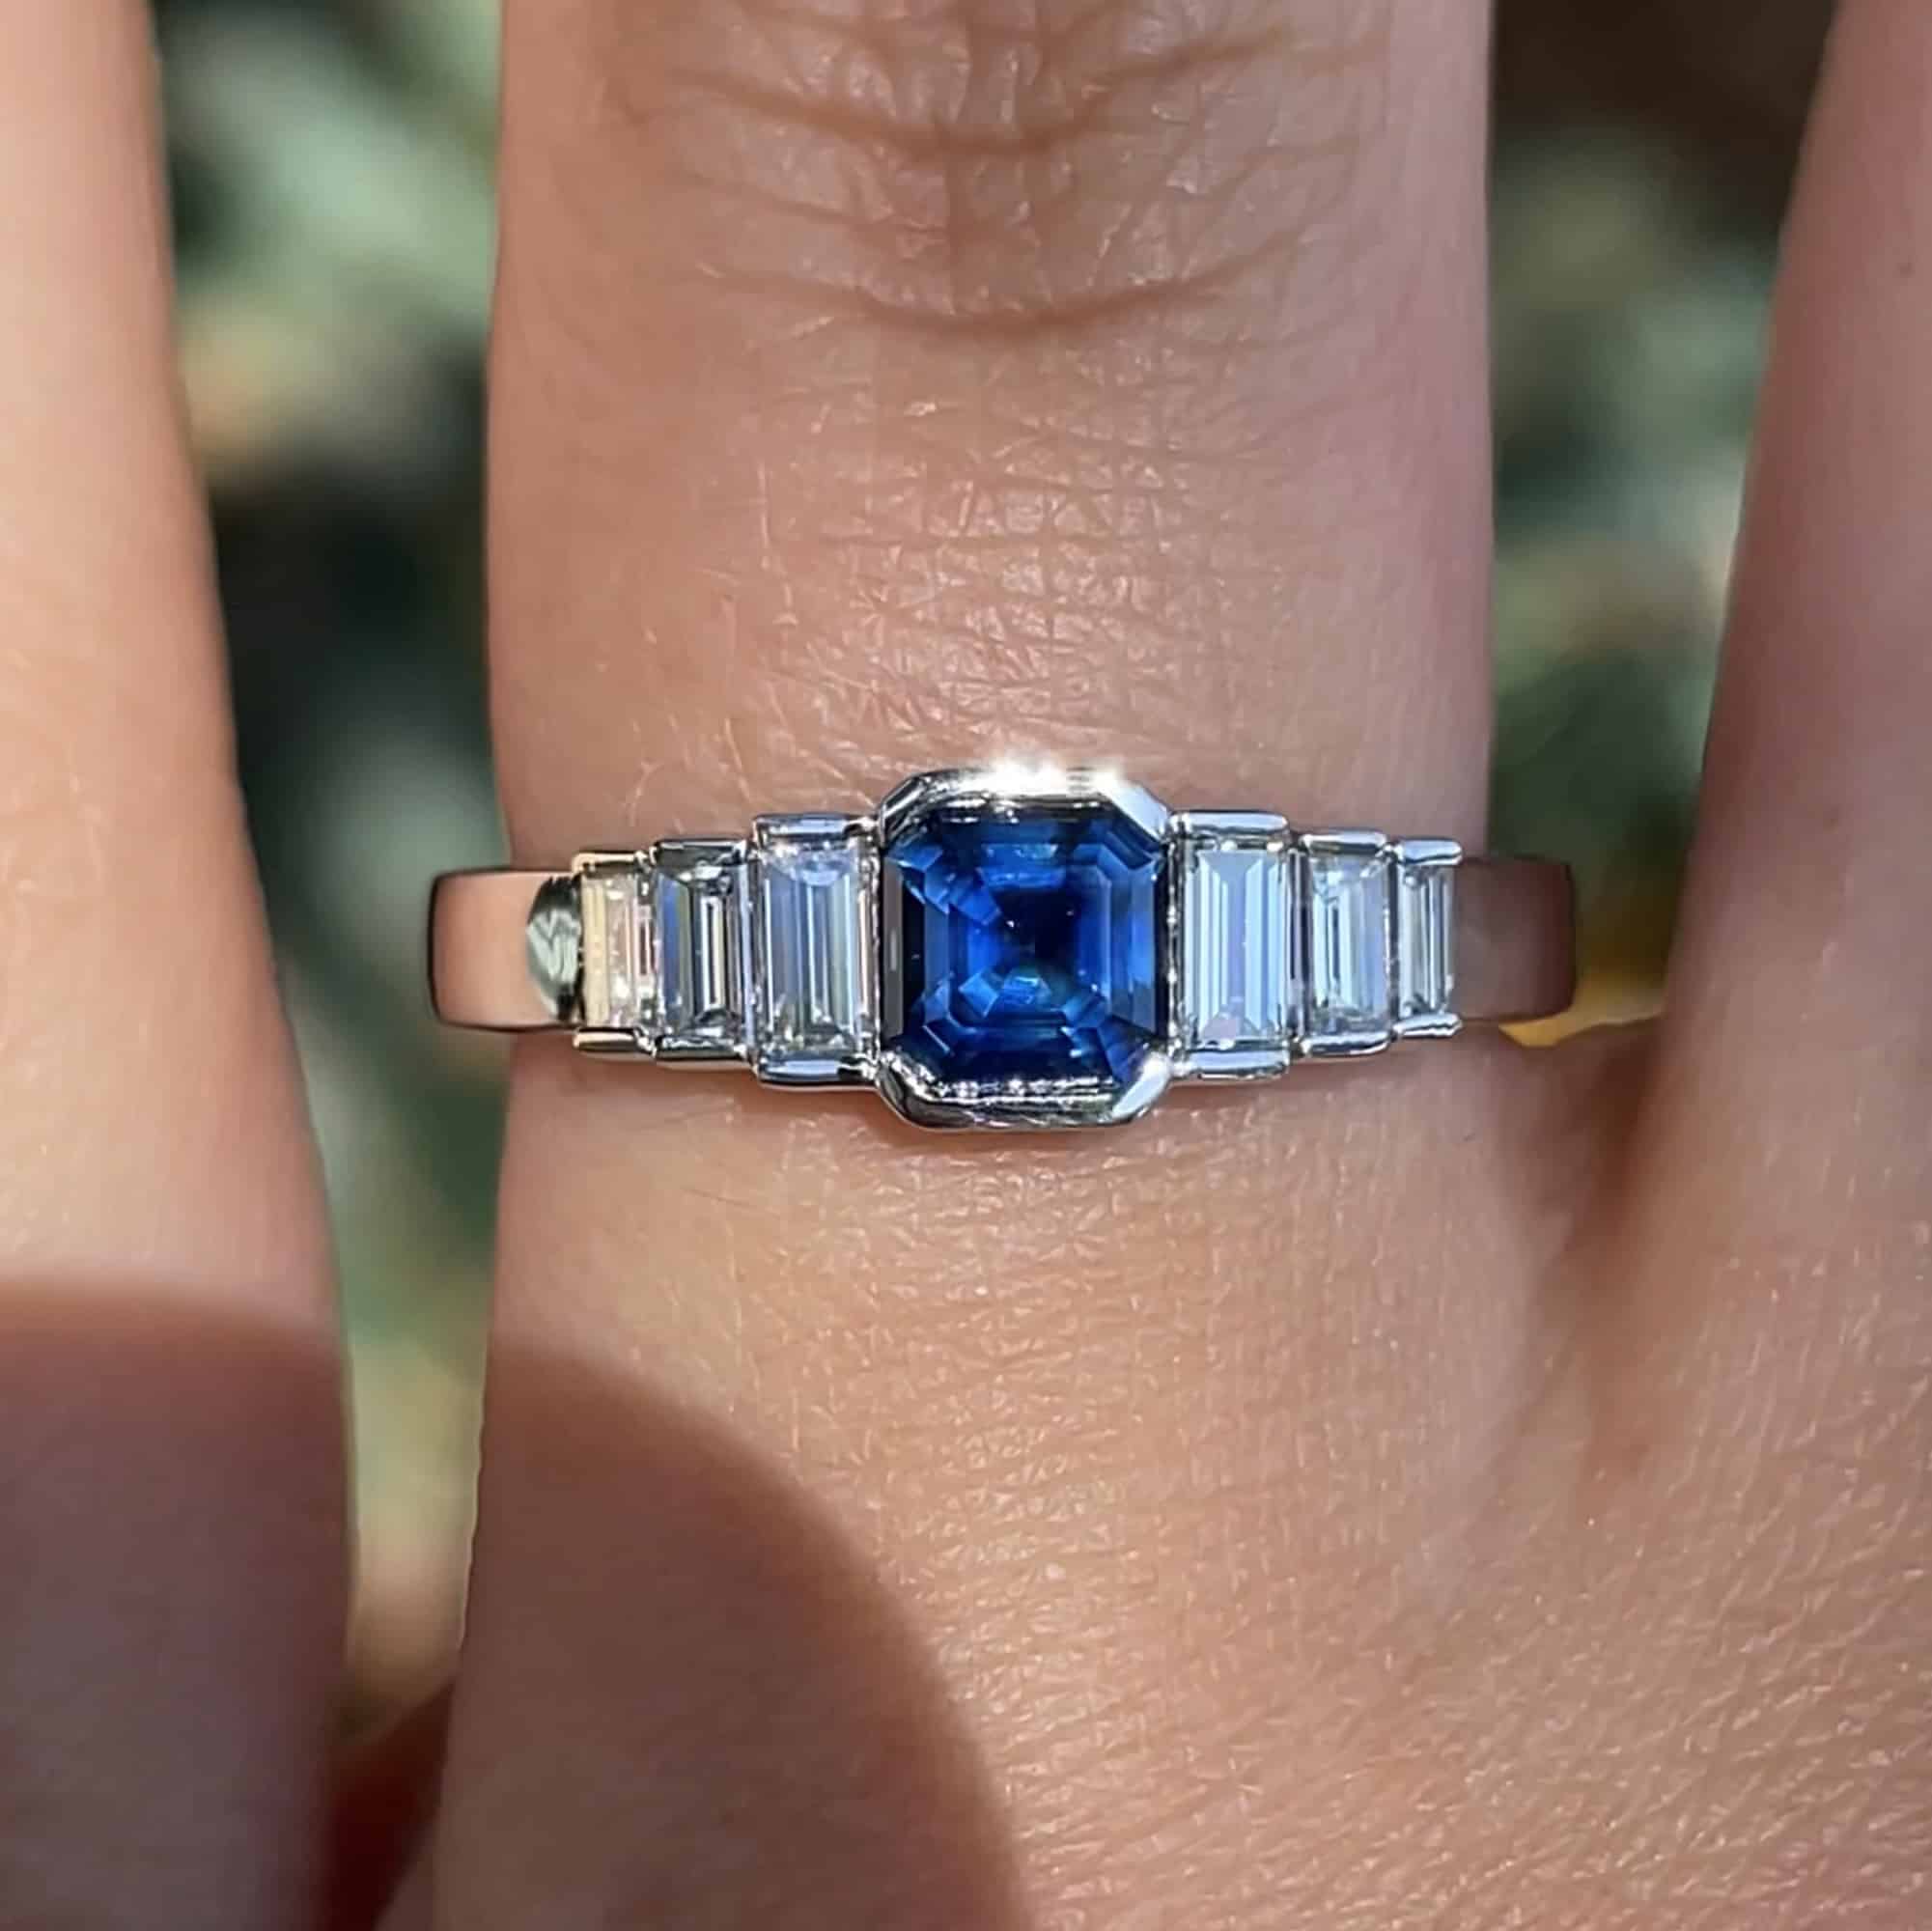 A custom ring in platinum with a 0.60-carat Montana sapphire